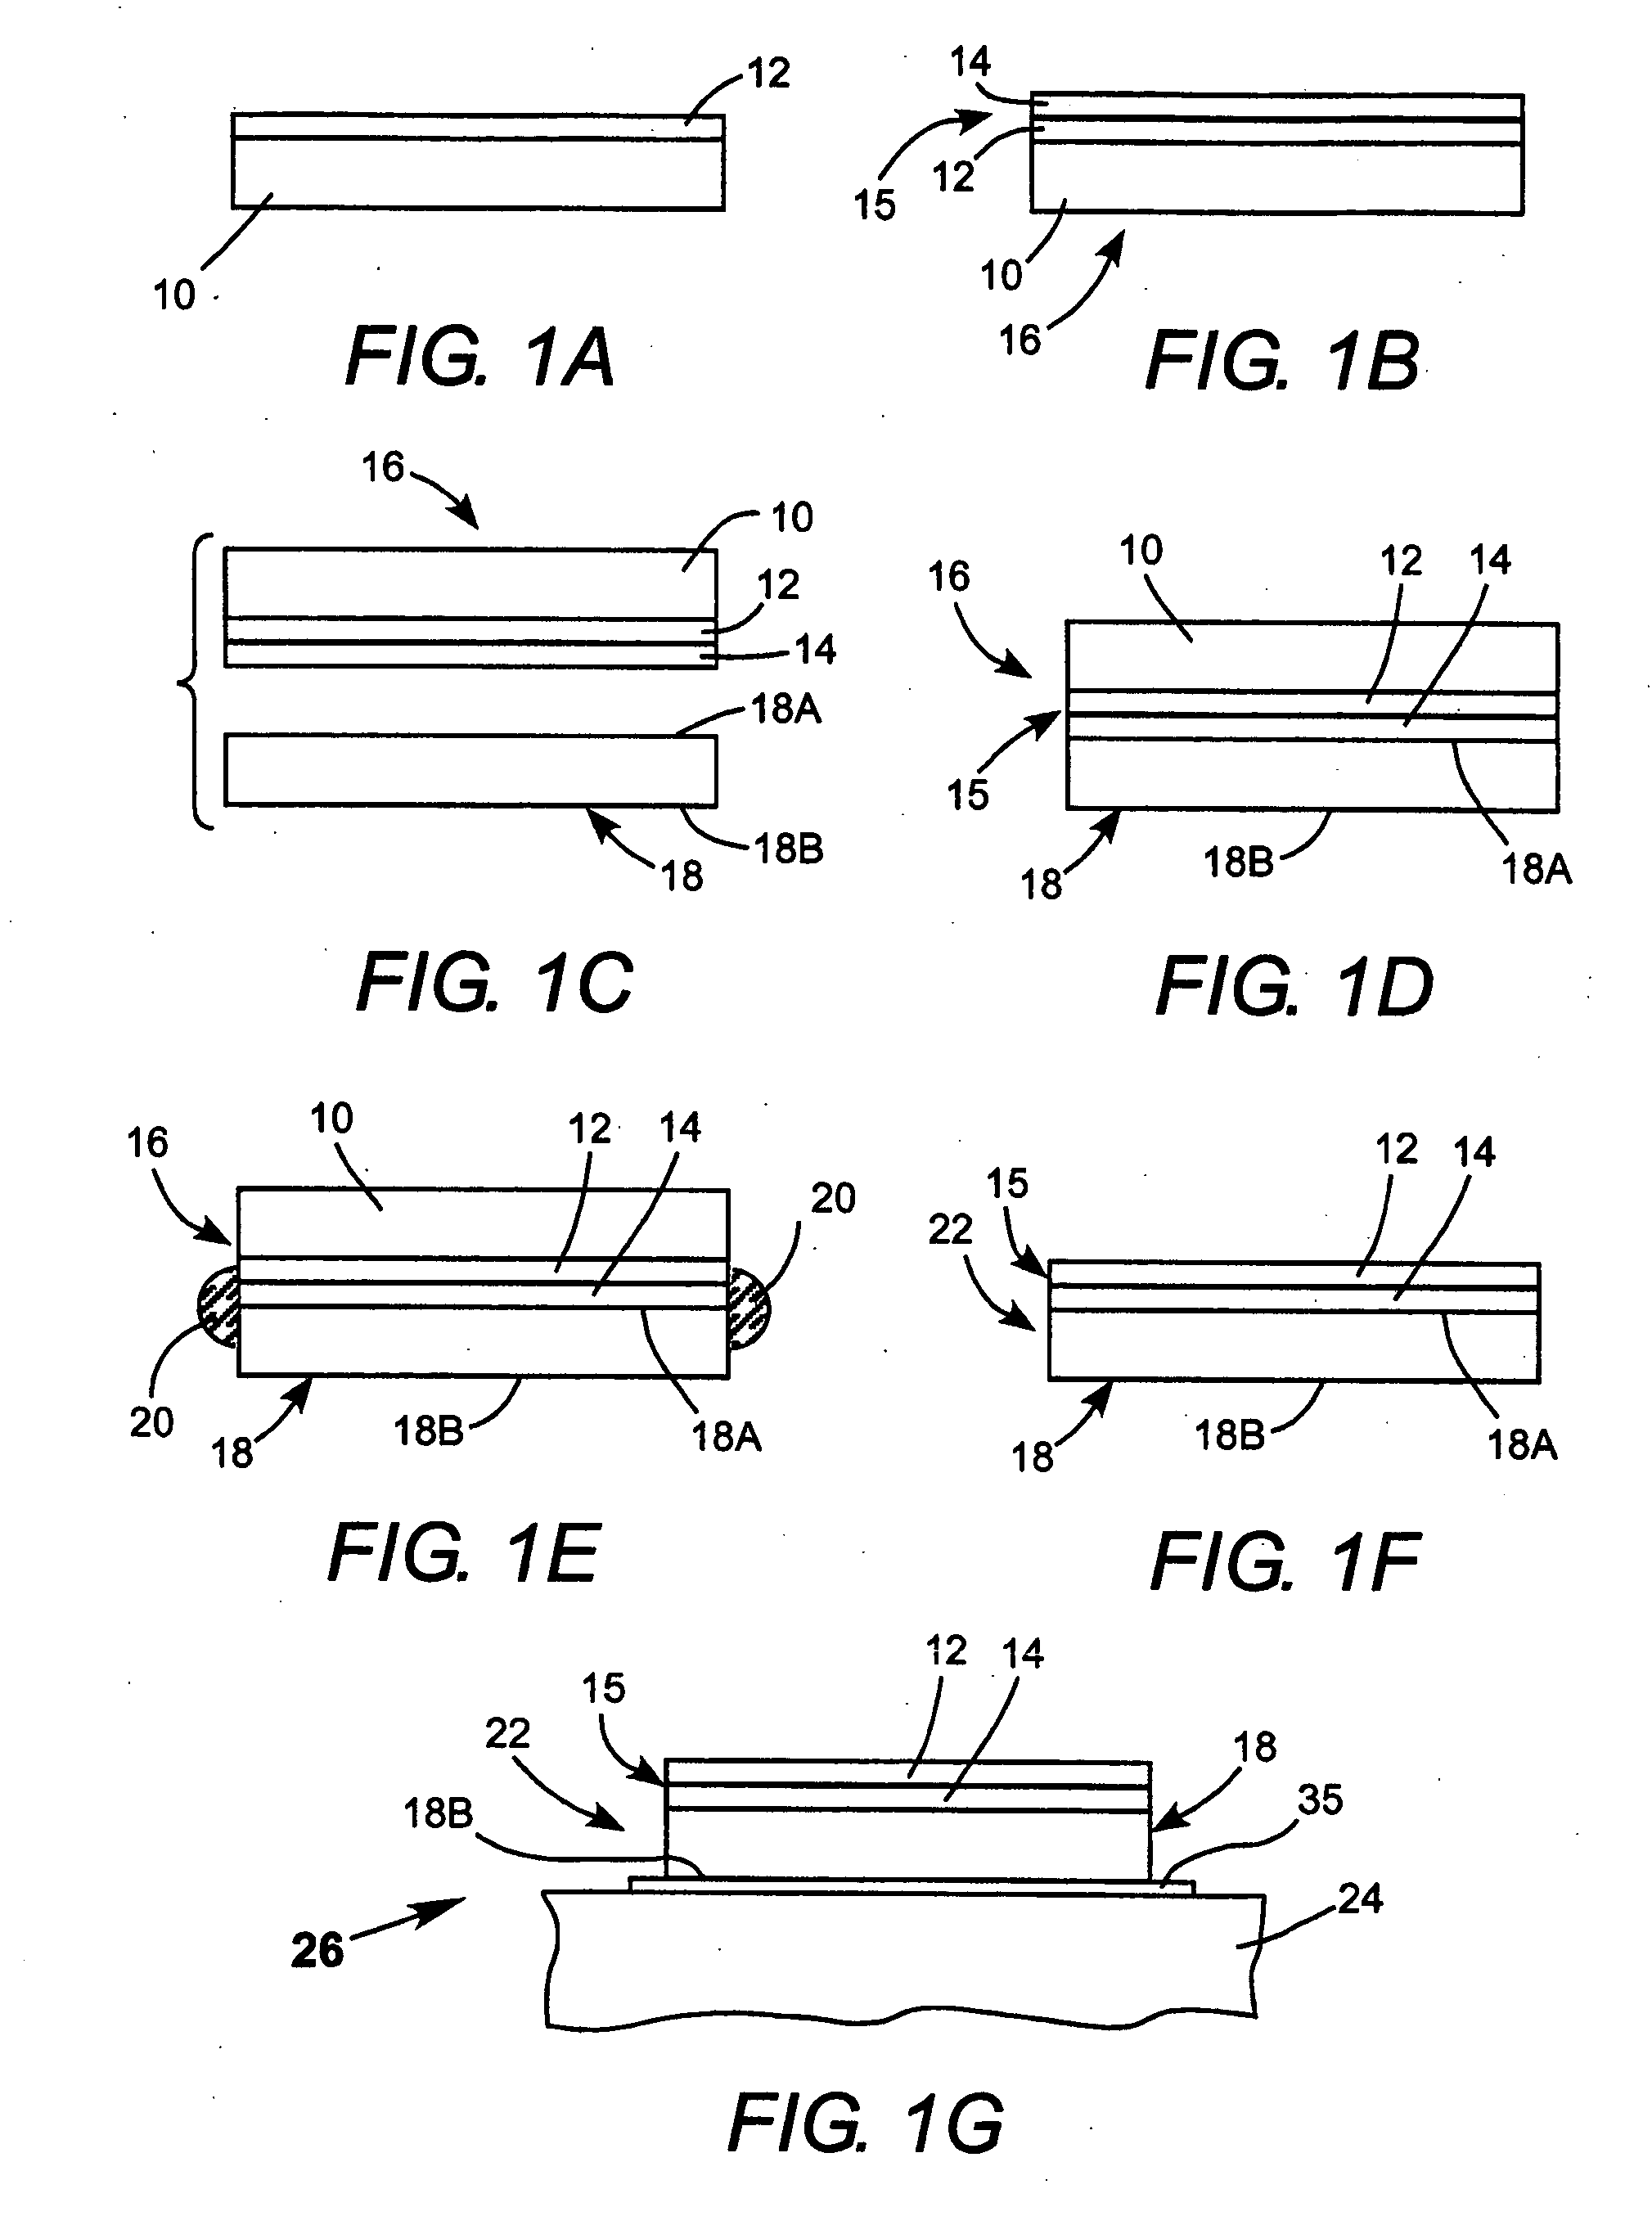 Contact-bonded optically pumped semiconductor laser structure